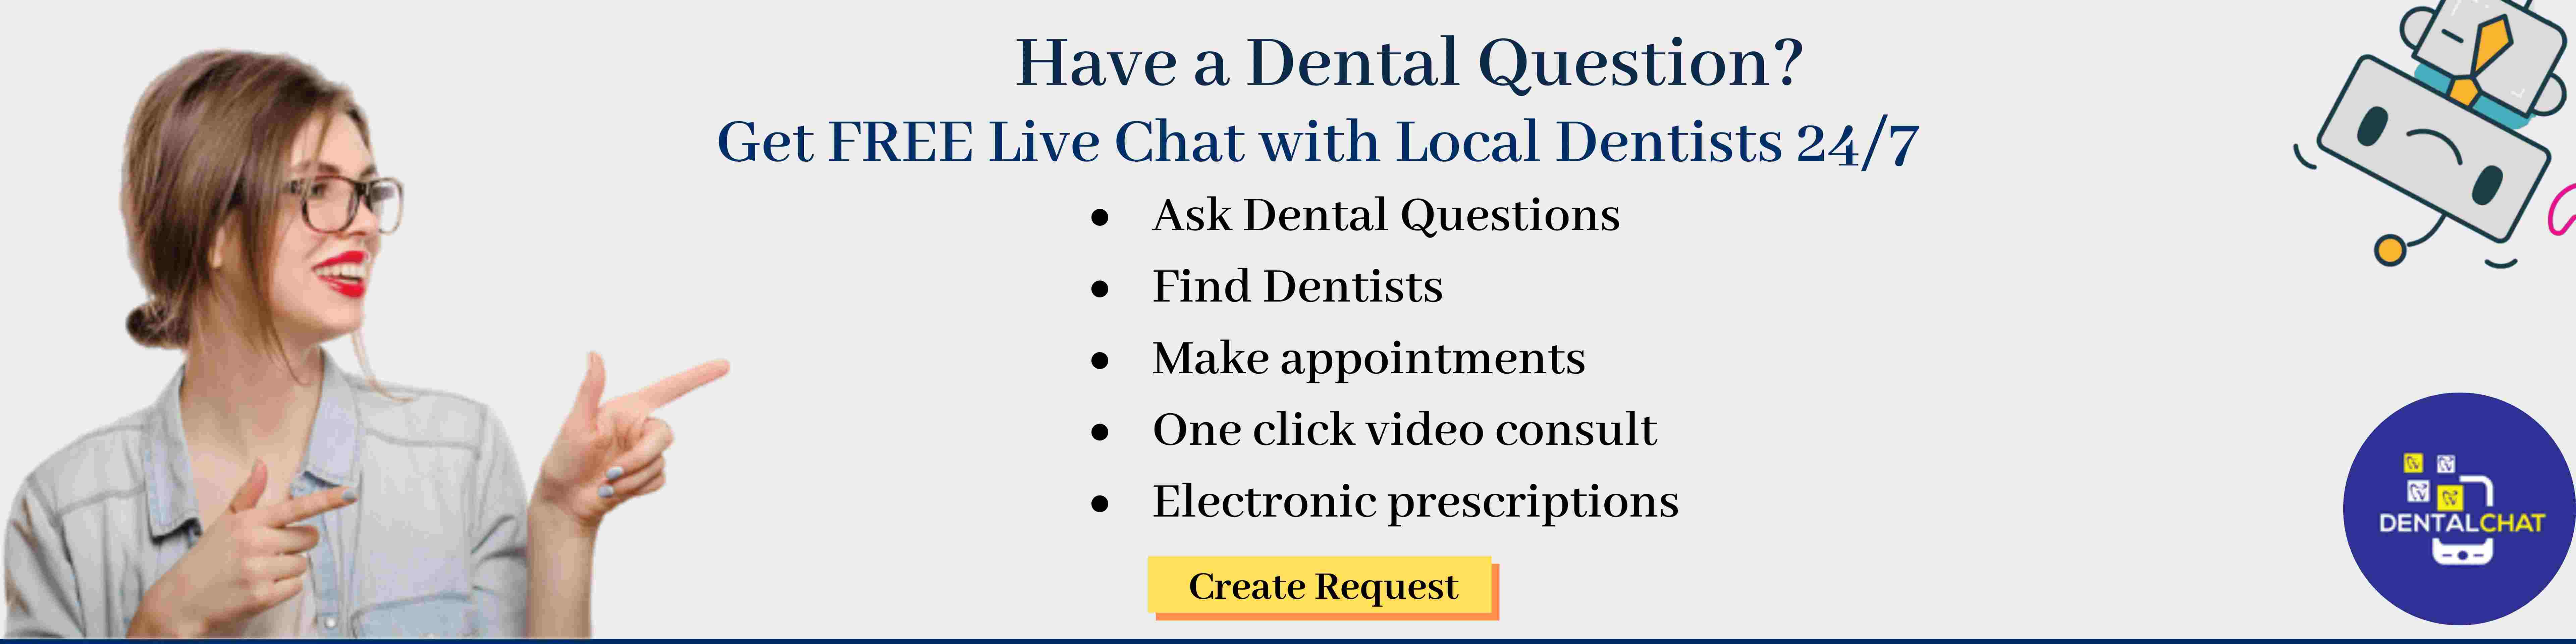 Ask Dentist Chat Box Question, Local Just Dentalbot Questions to Add to Website